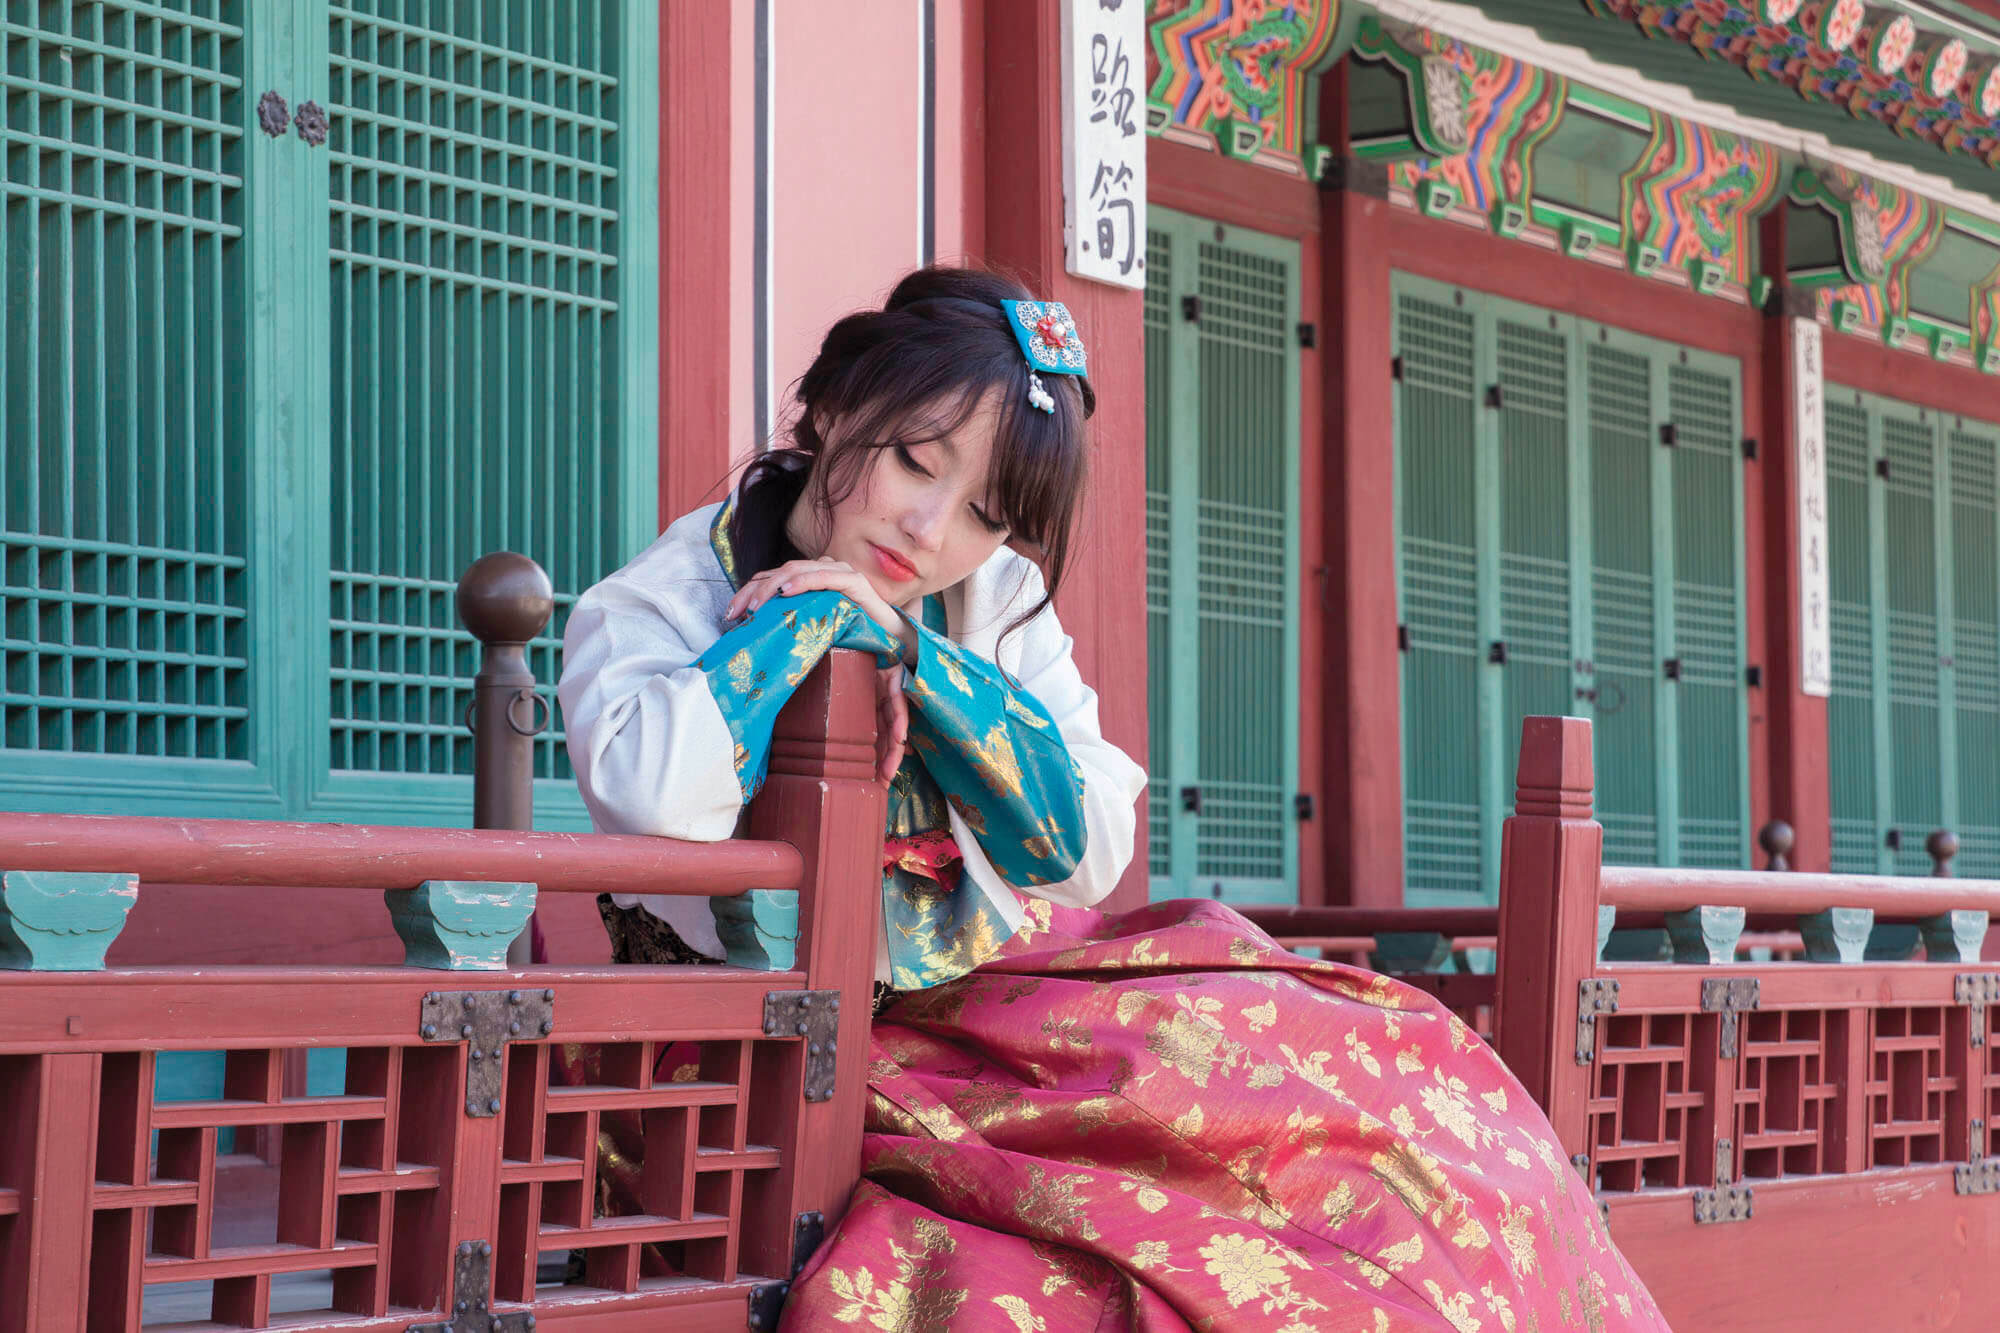 How to Spend a Day in Hanbok